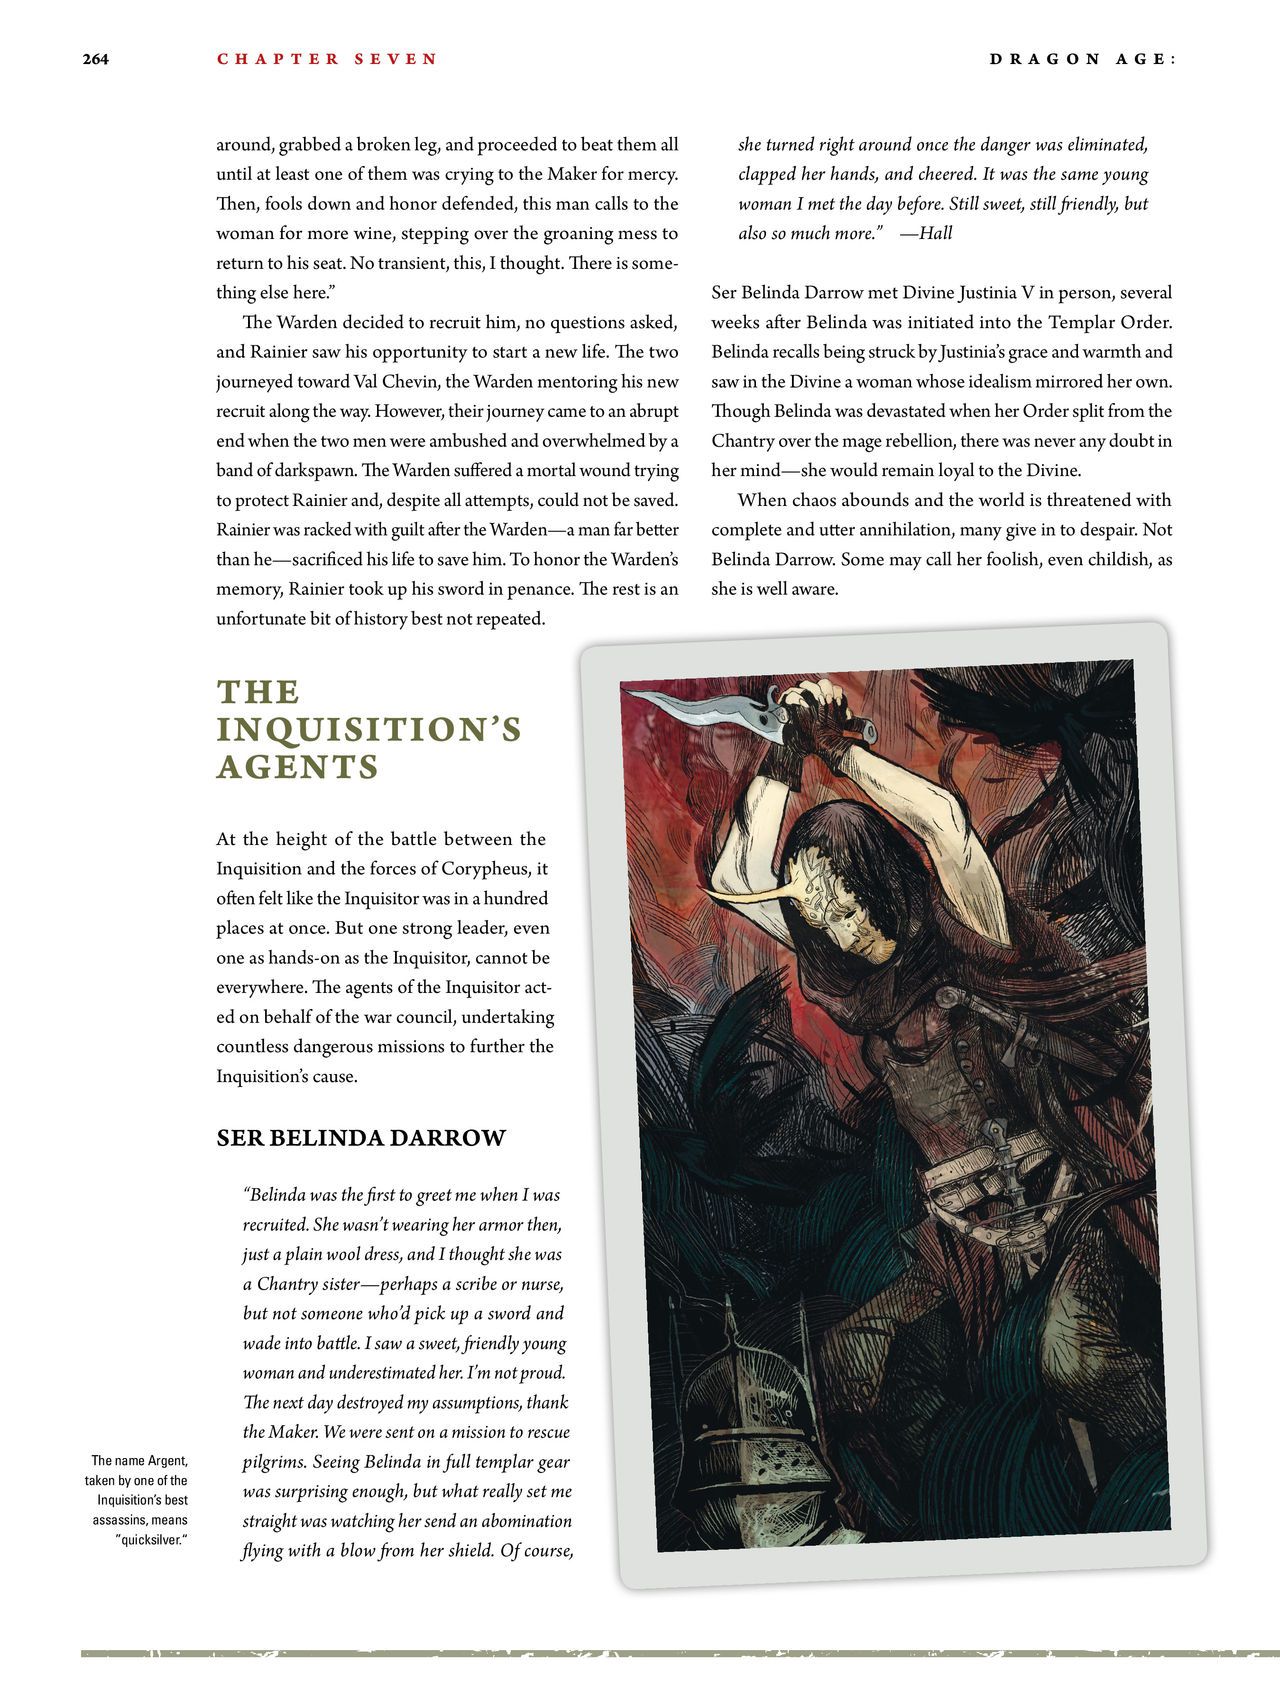 Dragon Age - The World of Thedas v02 257